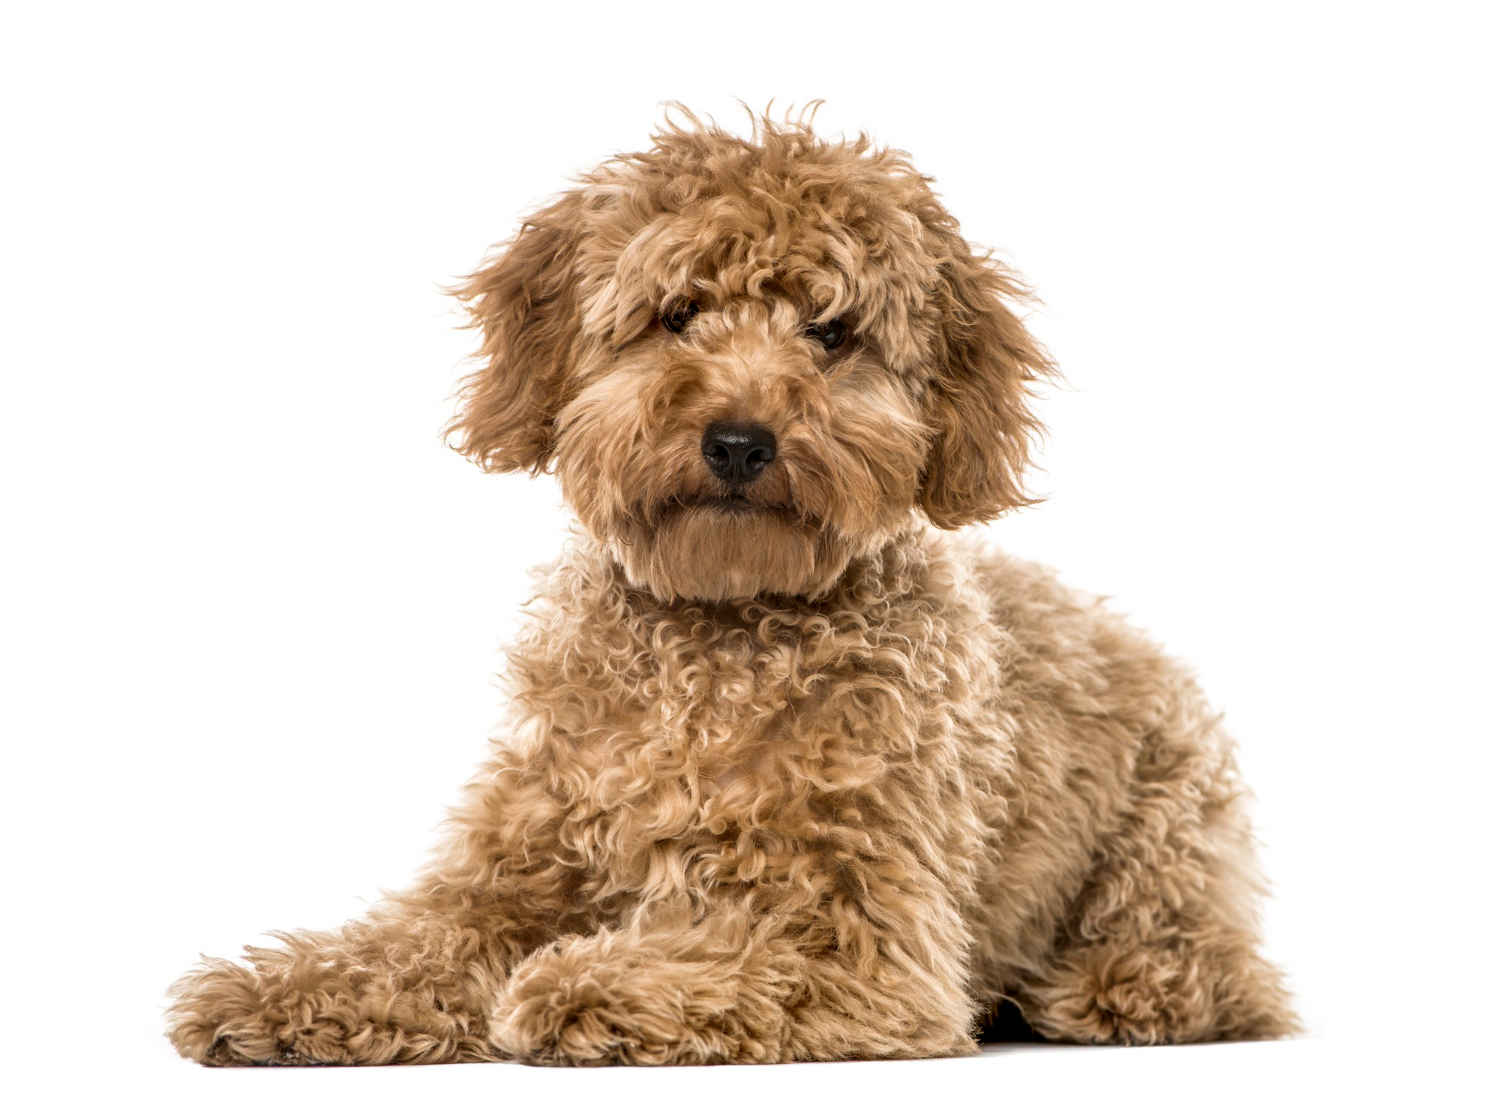 What are some signs that your Poodle puppy may be feeling anxious or scared?